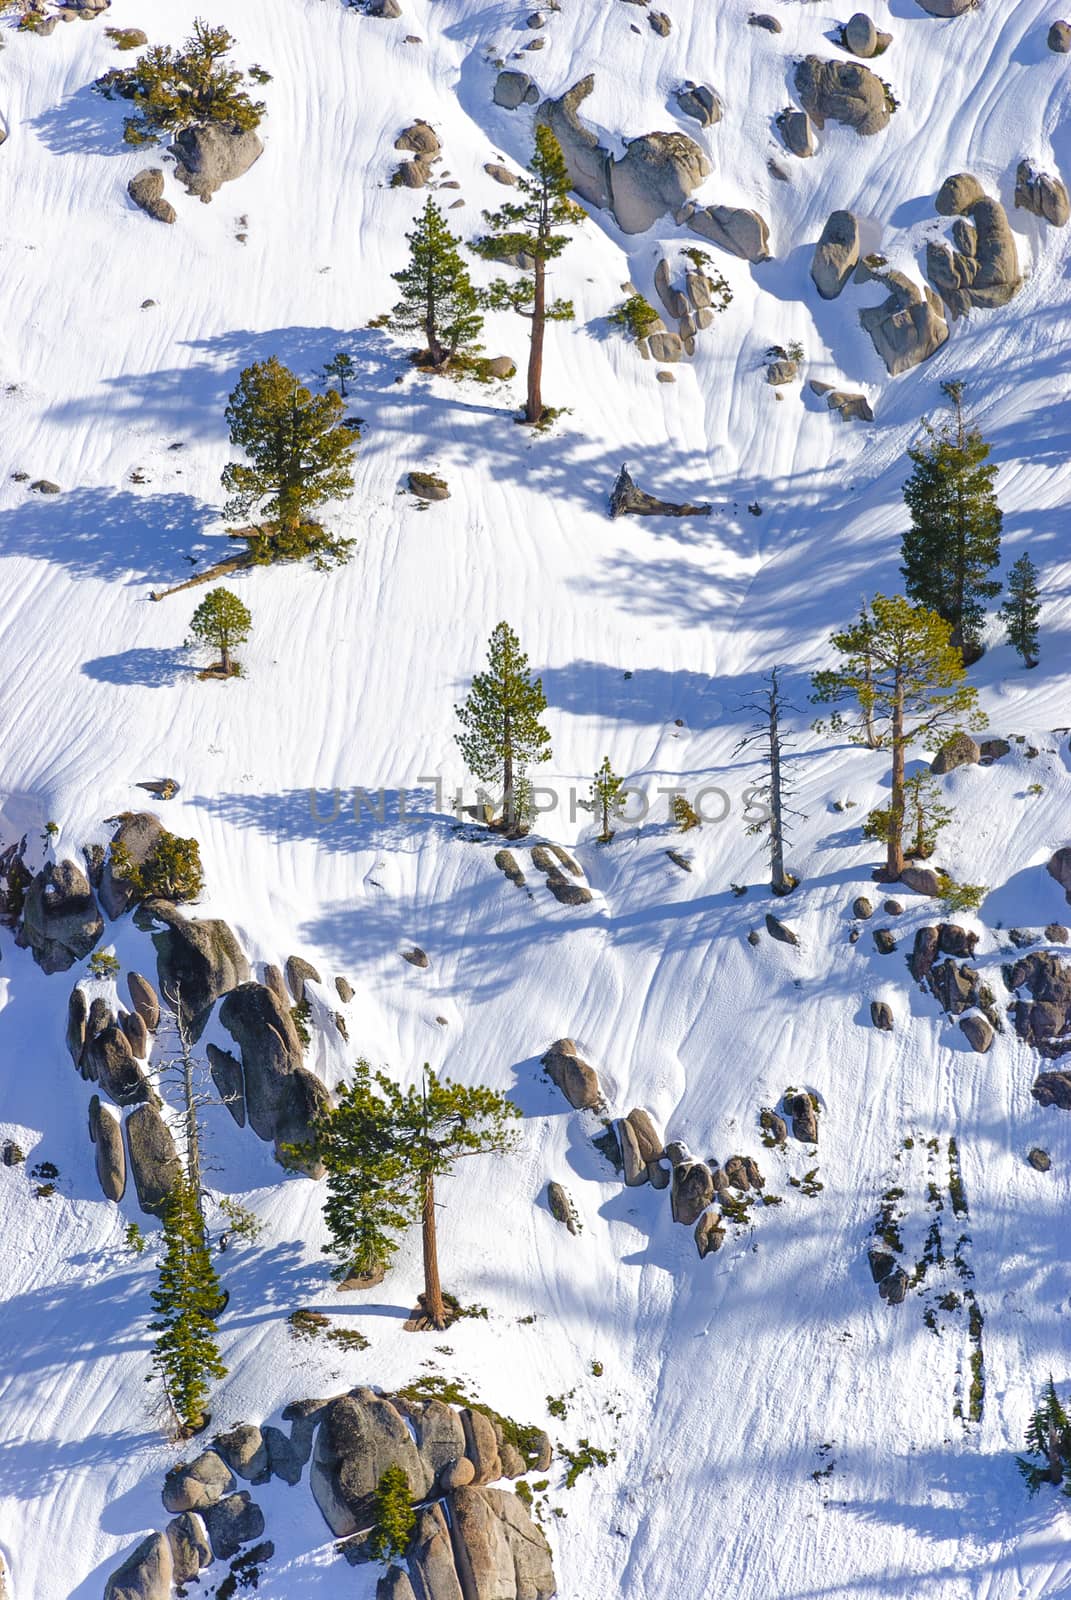 Squaw Valley by whitechild